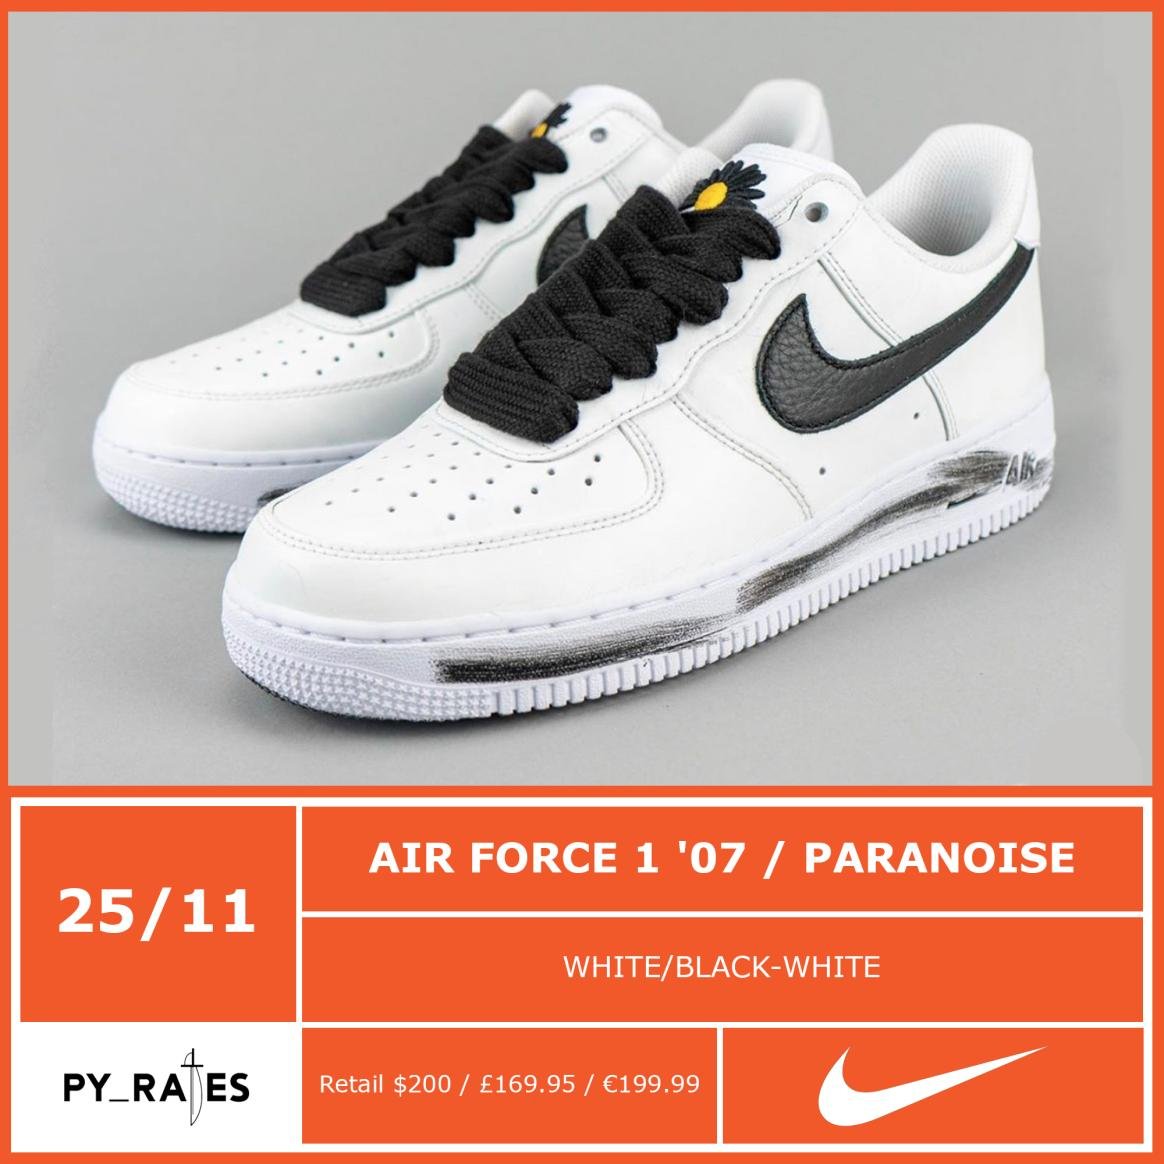 Paranoise Nike Air Force 1 White Black DD3223-100 Release Date